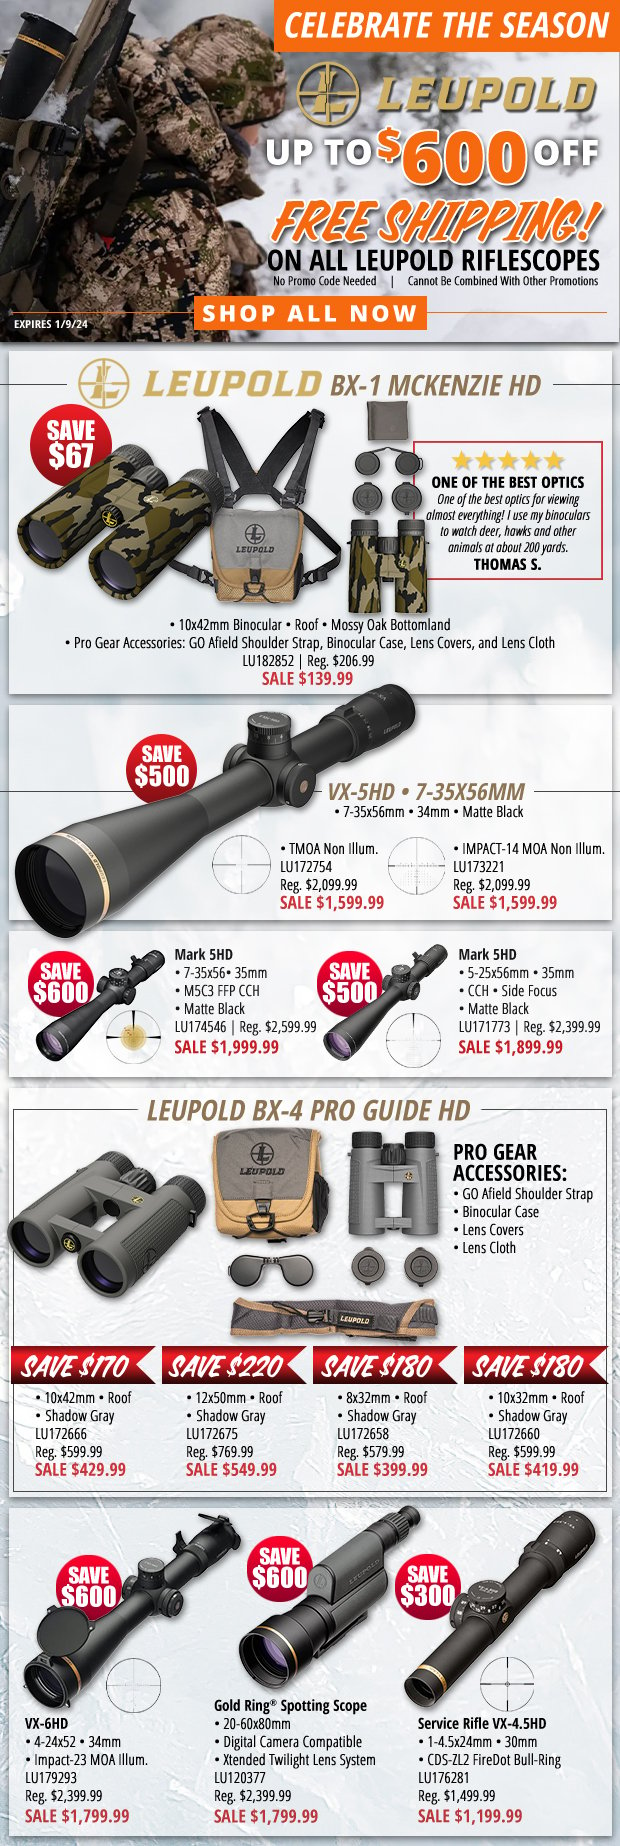 Celebrate the Season with Up to $600 Off Leupold!